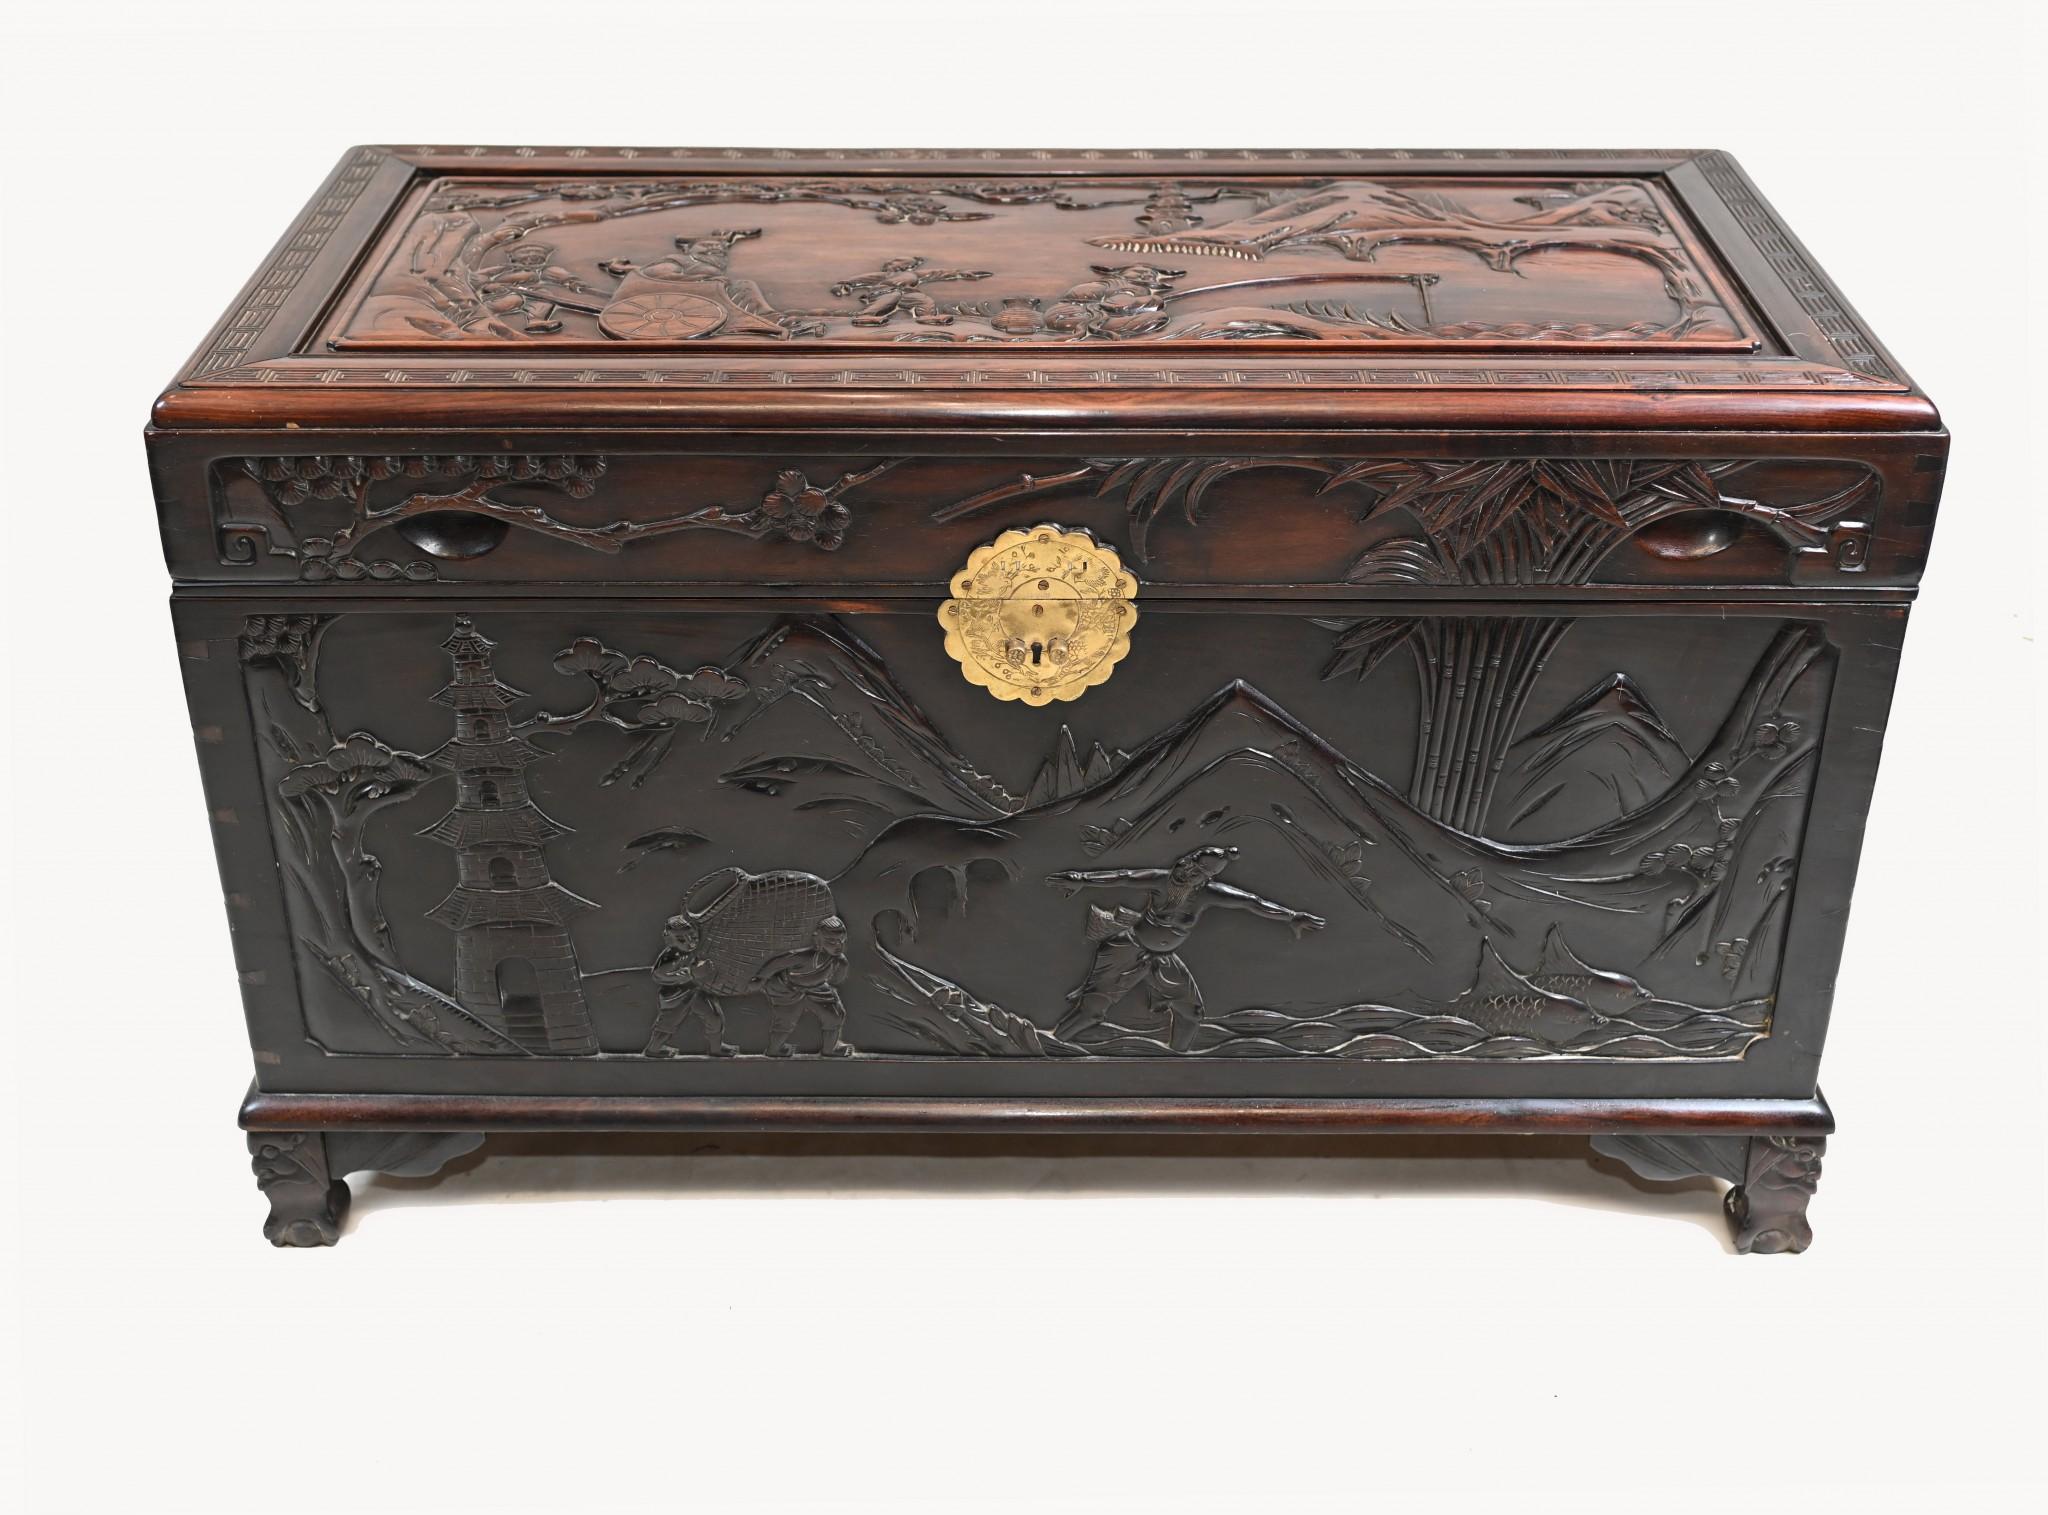 A rare Chinese hardwood camphor chest with carved scenes circa 1880
Good size and very solid
Carving is particularly detailed showing Chinese scenes
Offered in great shape ready for home use right away
We ship to every corner of the planet